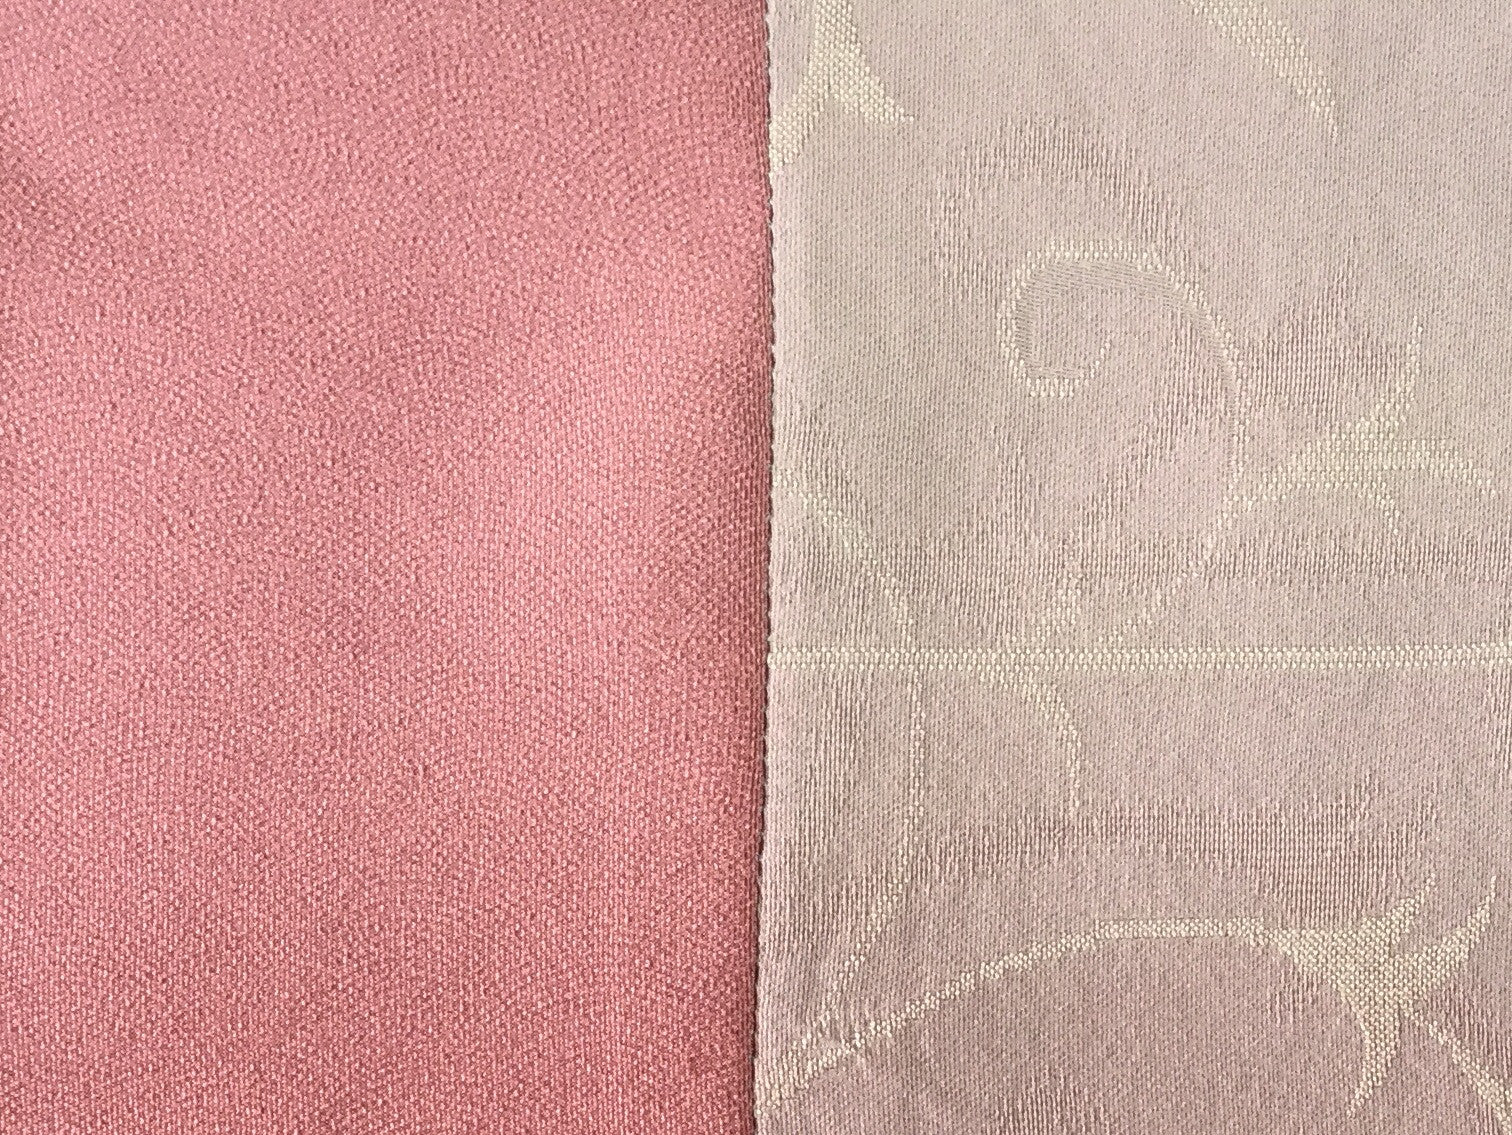 Straight Scarf Mauve Pink ストレートスカーフ ピンク 薄ピンク 模様 Megumi Project